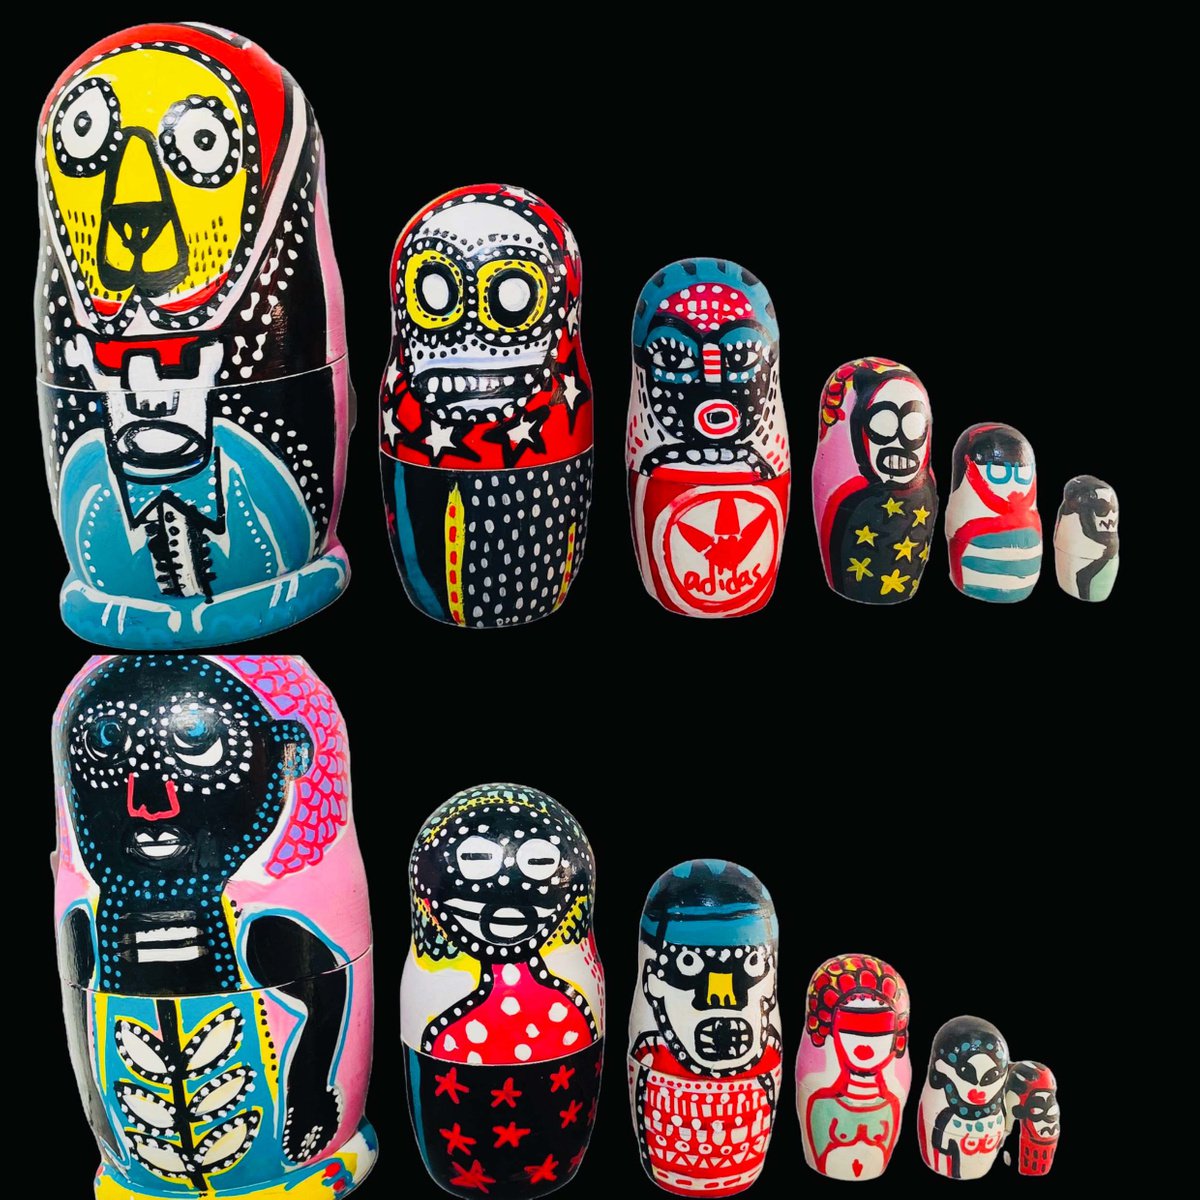 Hand painted set of Russian dolls by Georgia Sawers